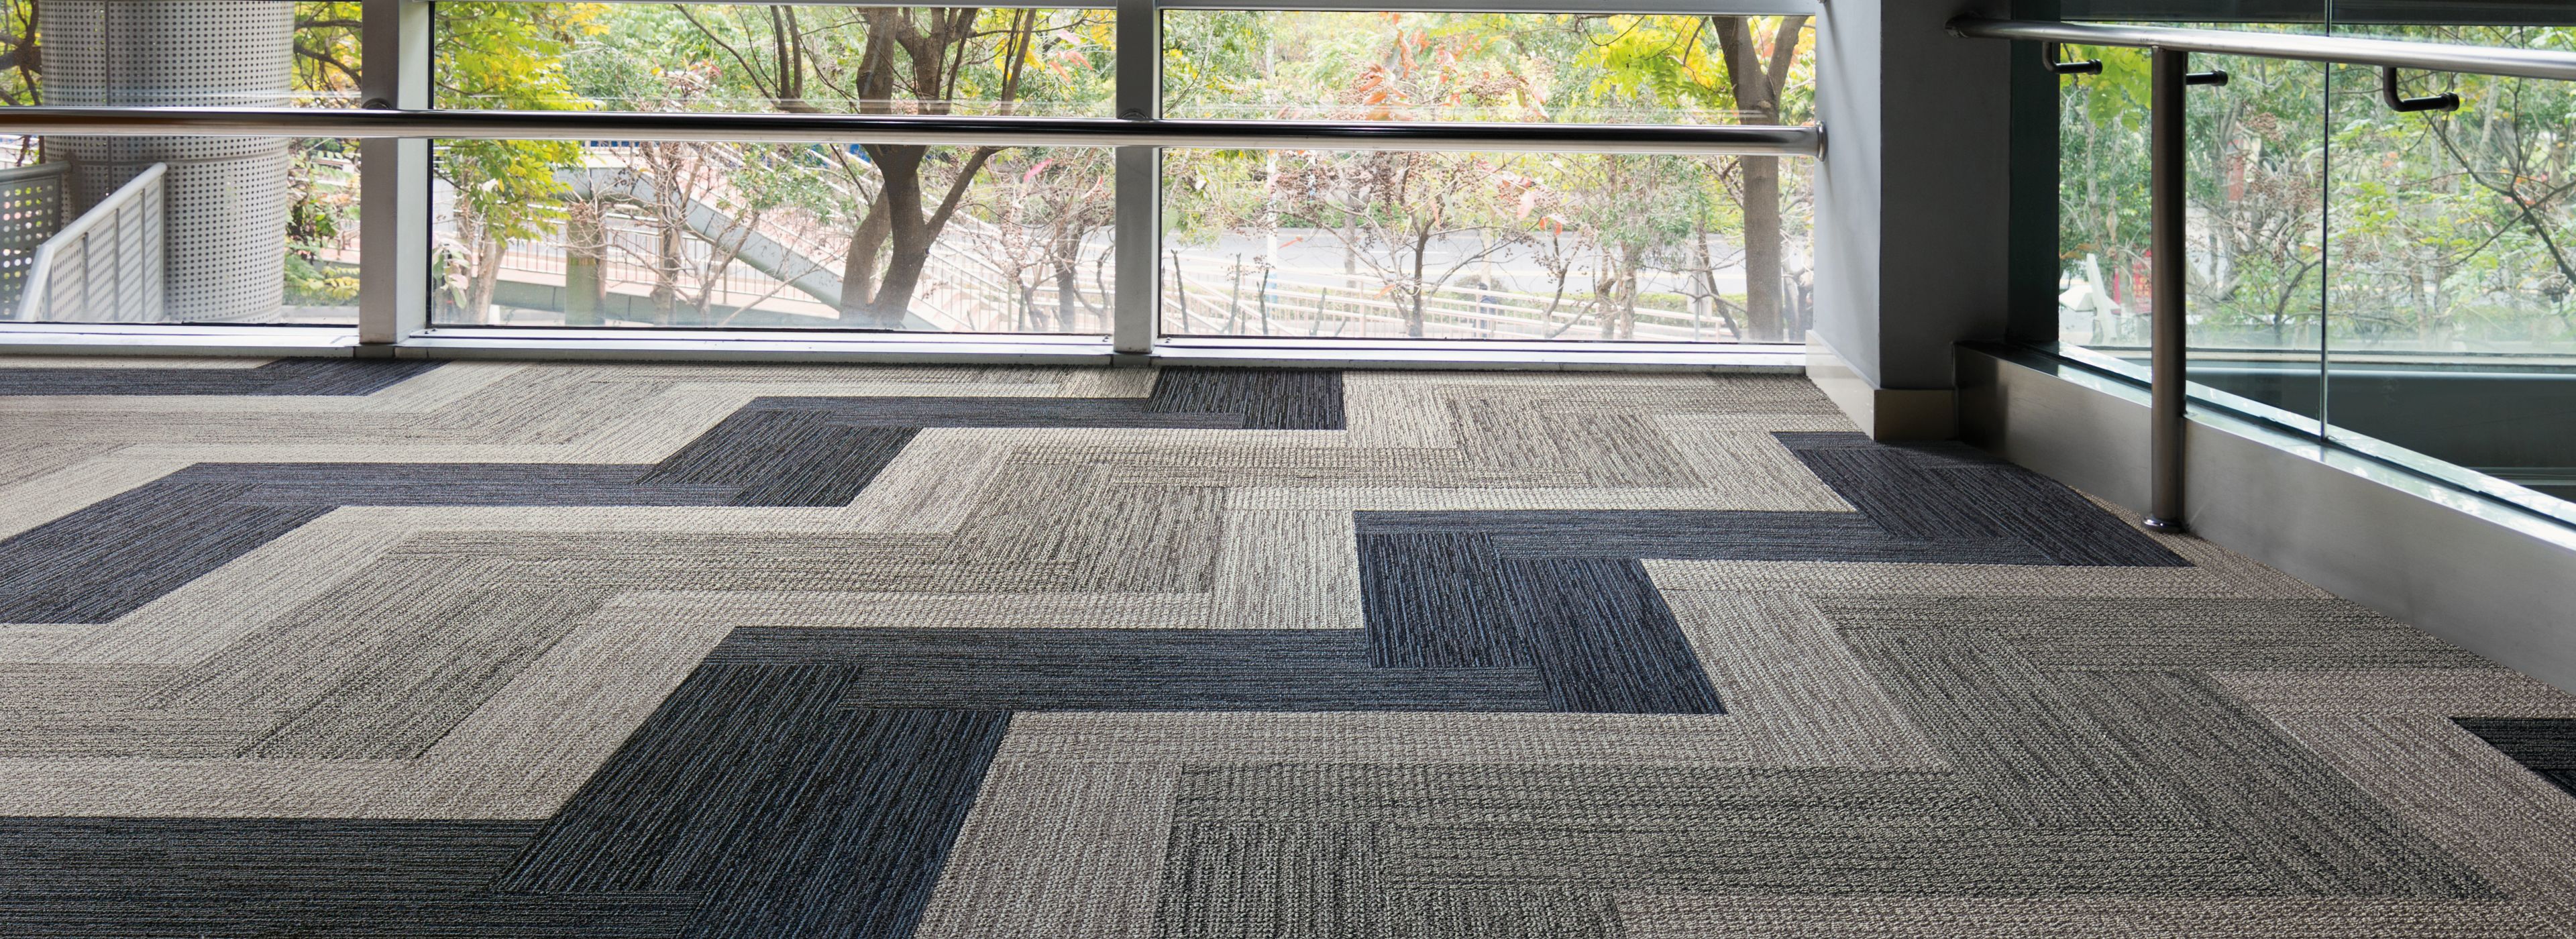 Interface Afternoon Light and Winter Sun carpet tile in open area with glass walls numéro d’image 1